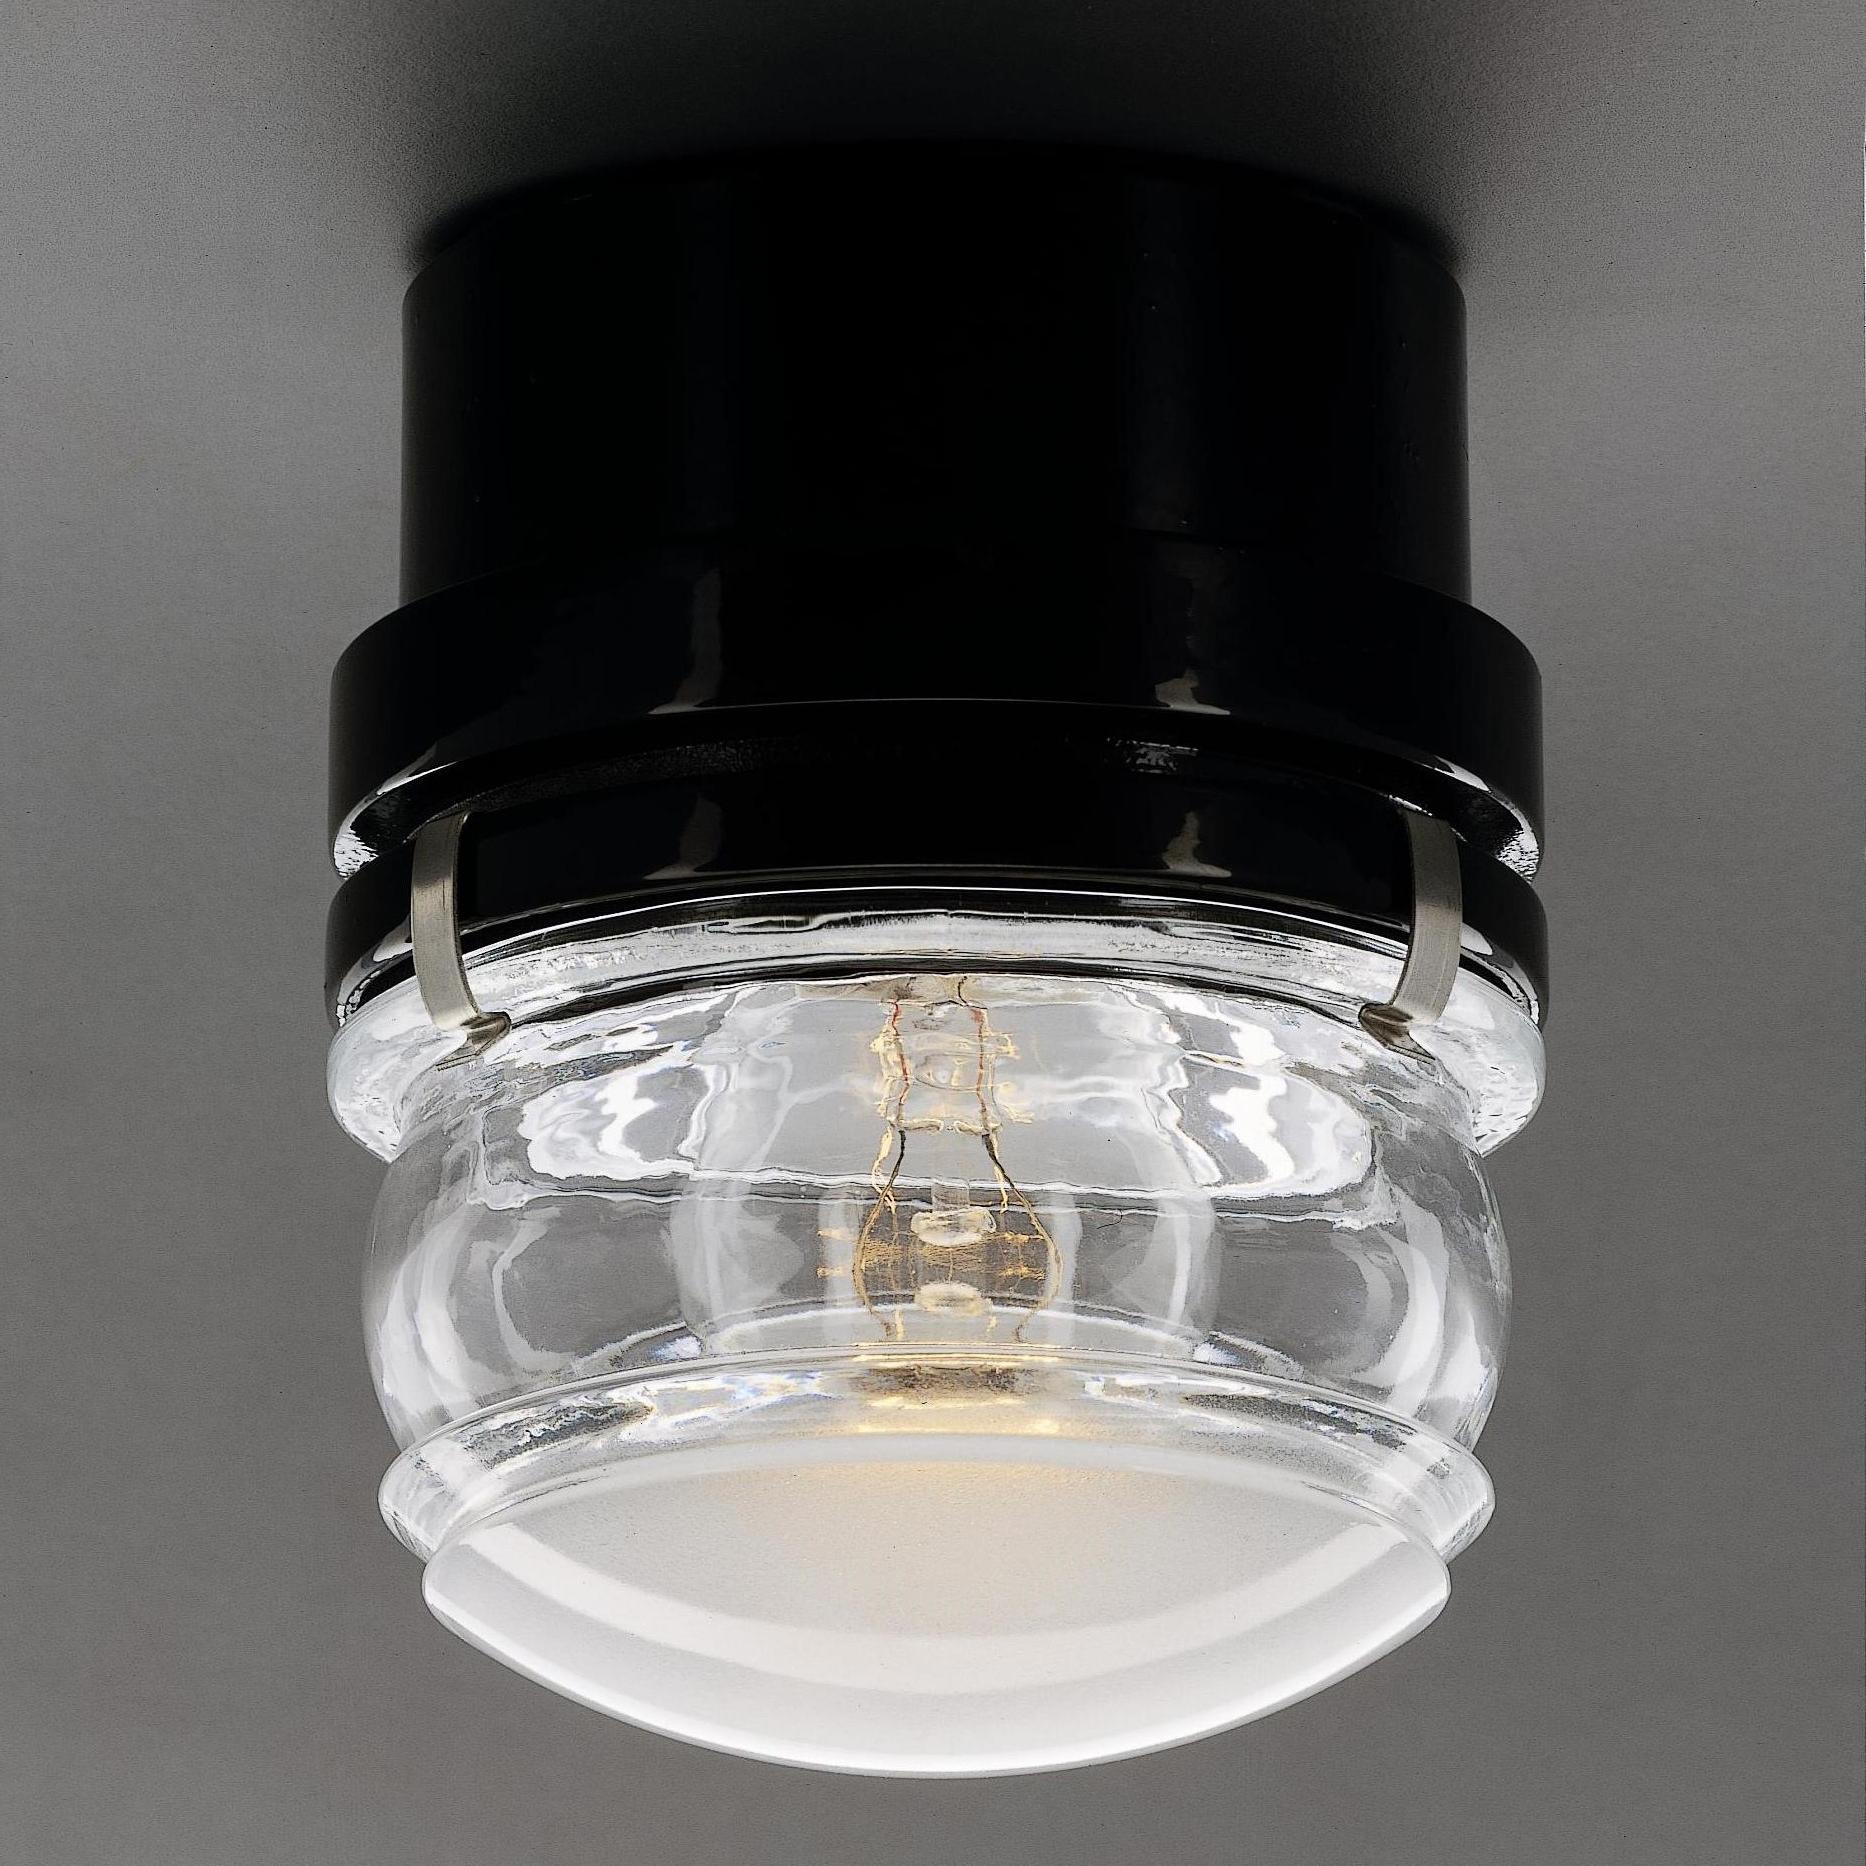 Mid-Century Modern Joe Colombo Inside and Outside Wall and Ceiling Lamp 'Fresnel' Black by Oluce